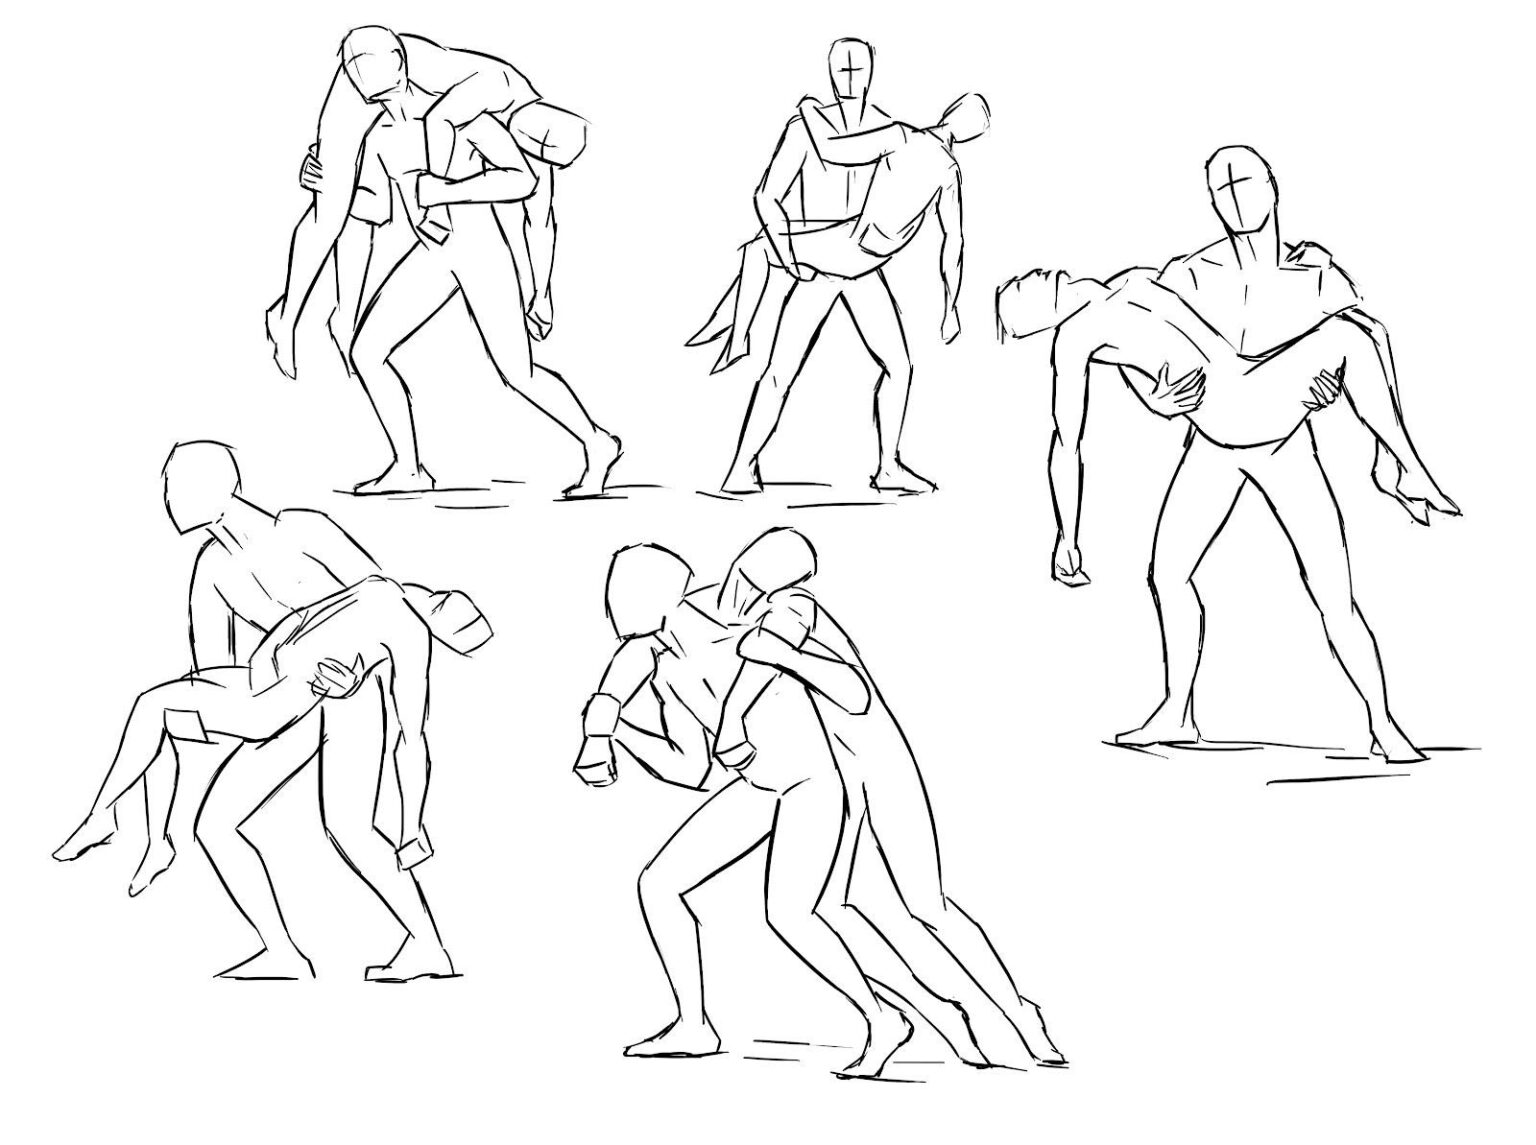 Carry pose Drawing References.